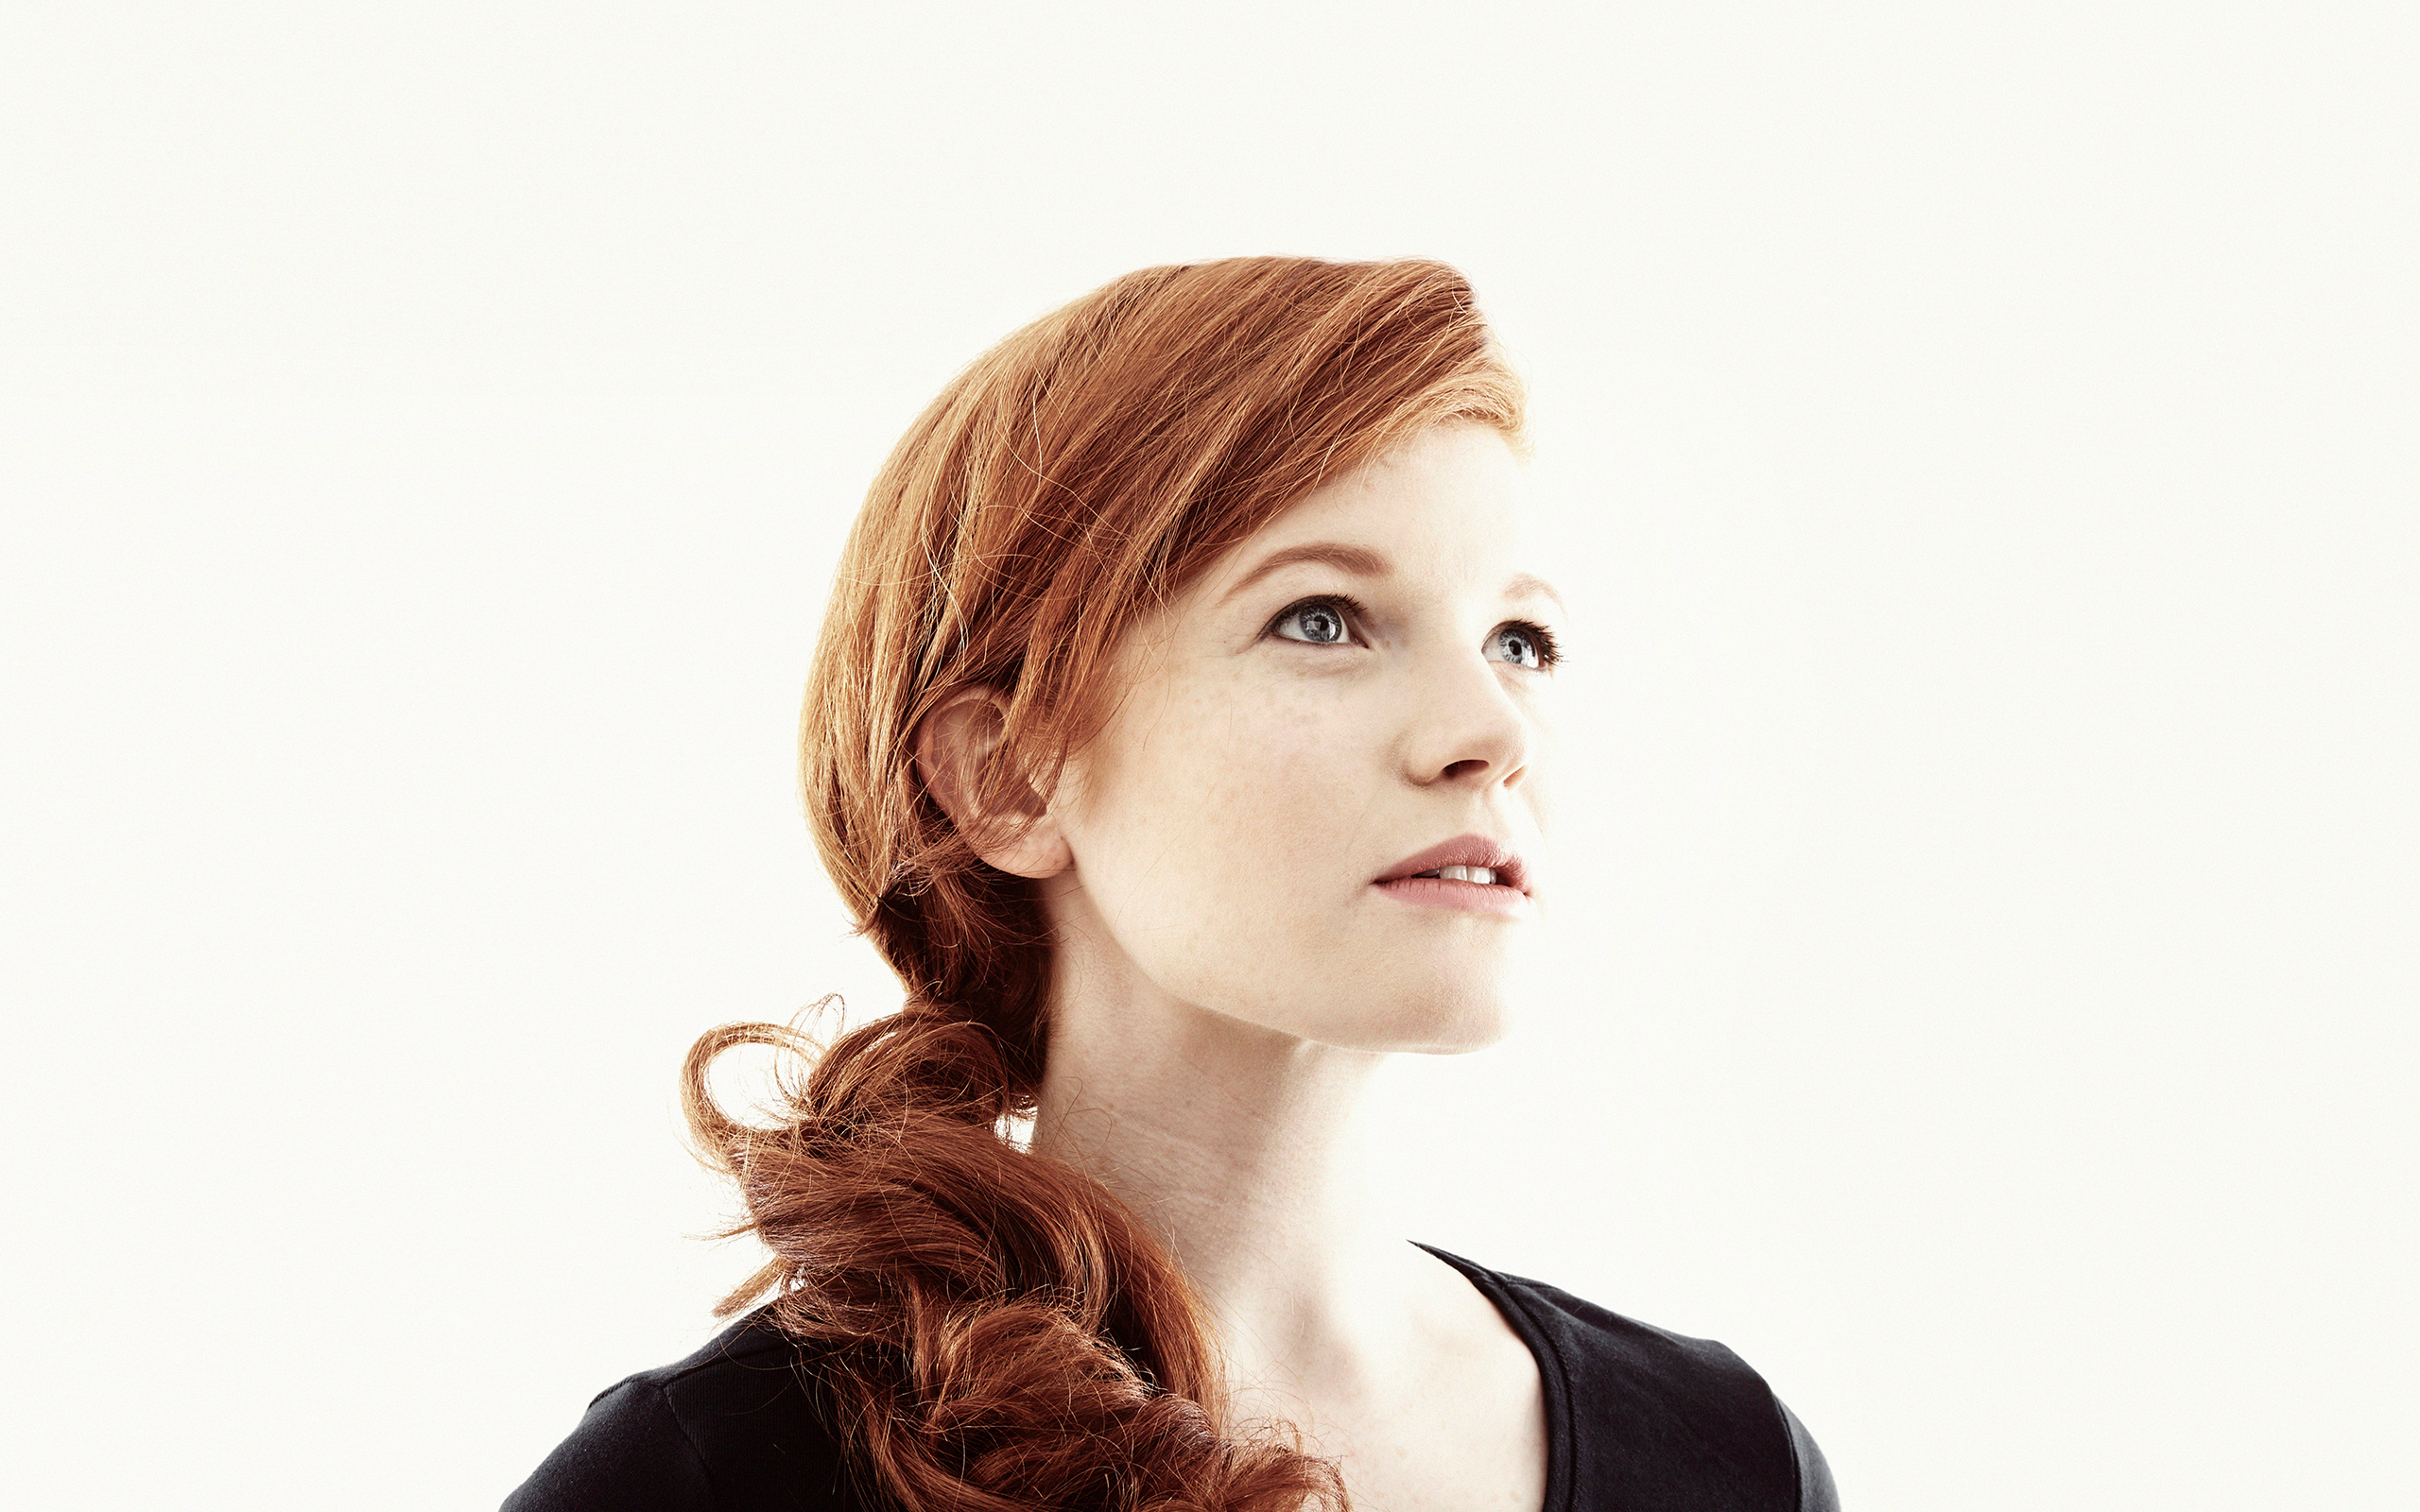 A woman in her twenties with red hair looks thoughtfully toward the sky.